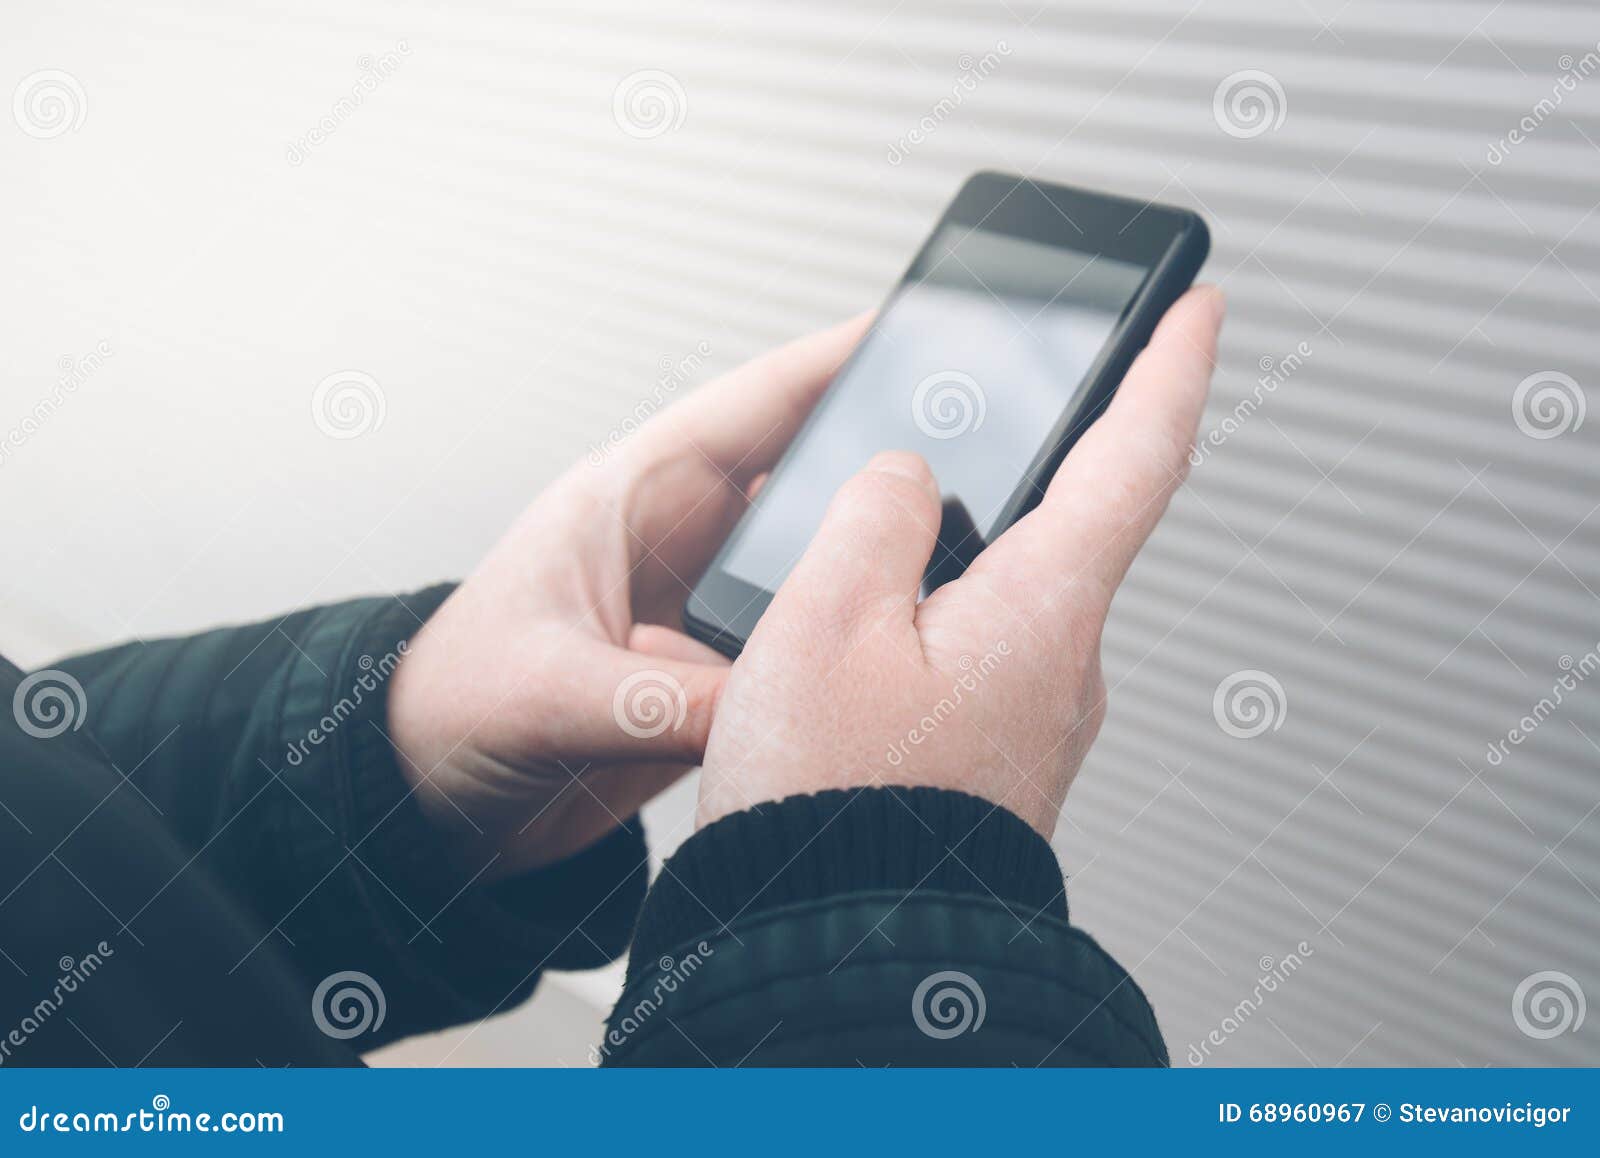 Woman Using Smartphone on the Street Facing the Wall Stock Image ...